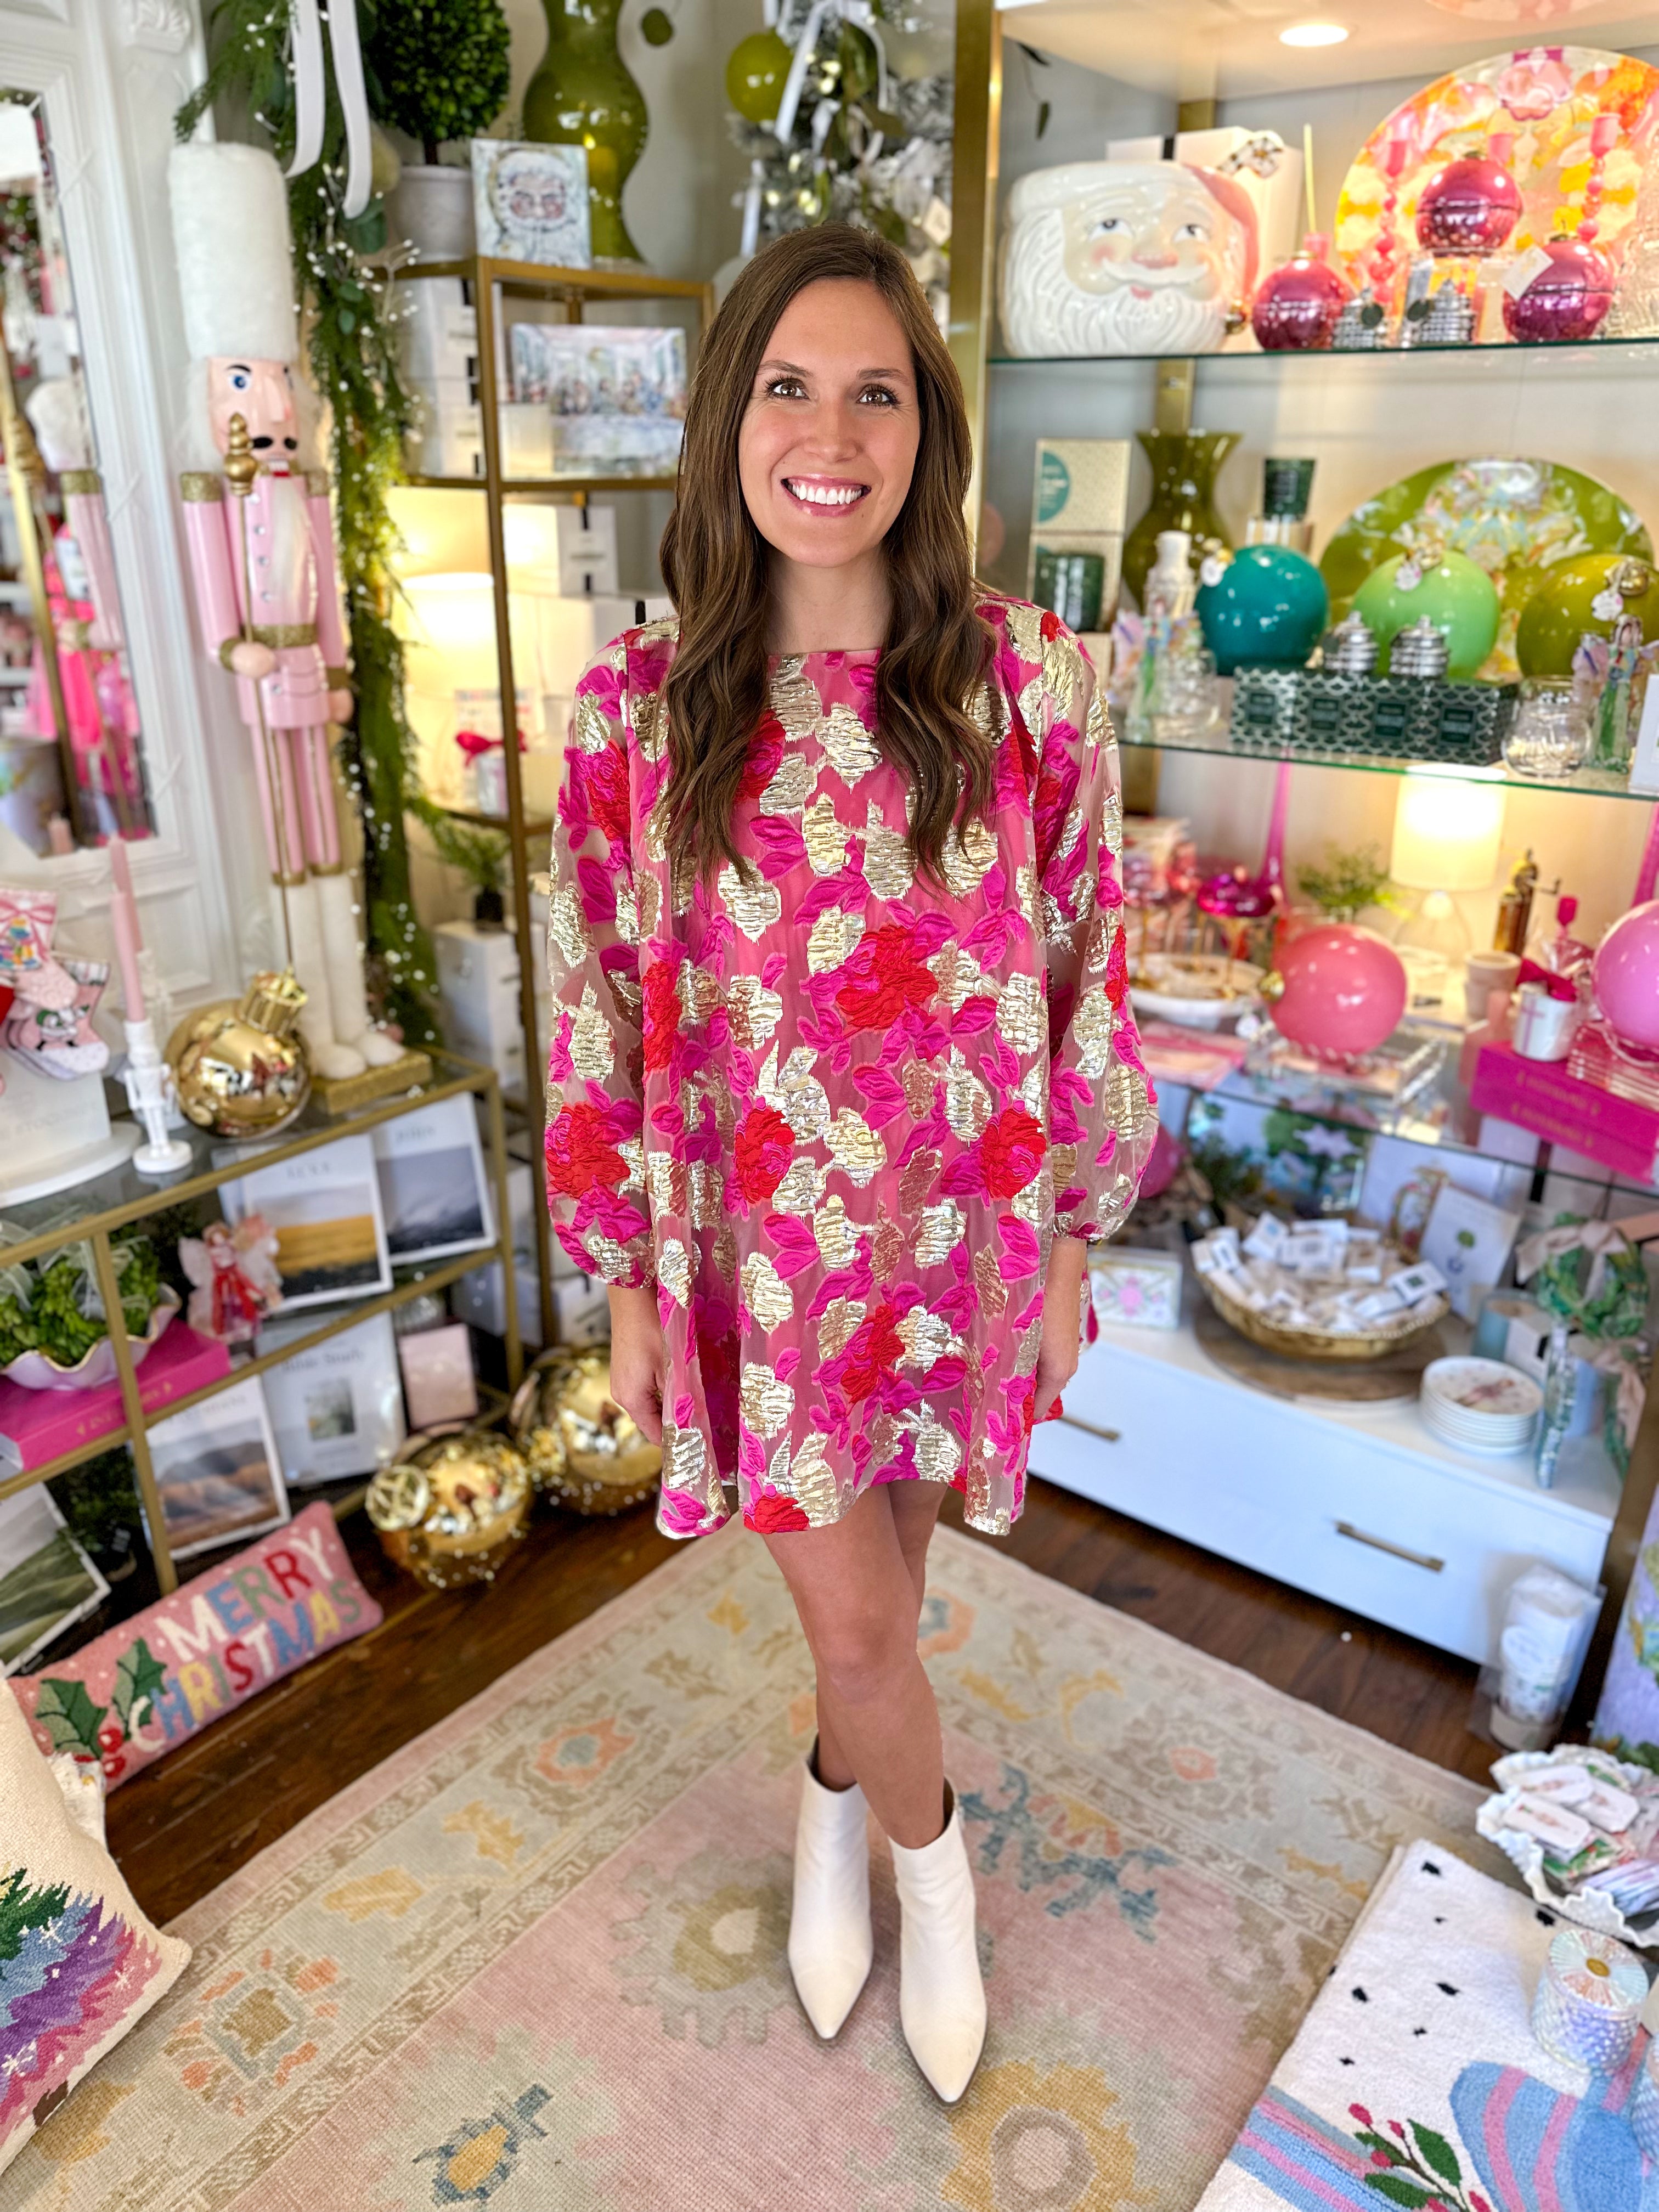 Bell Dress Pink and Gold Floral Brocade | Brianna Cannon